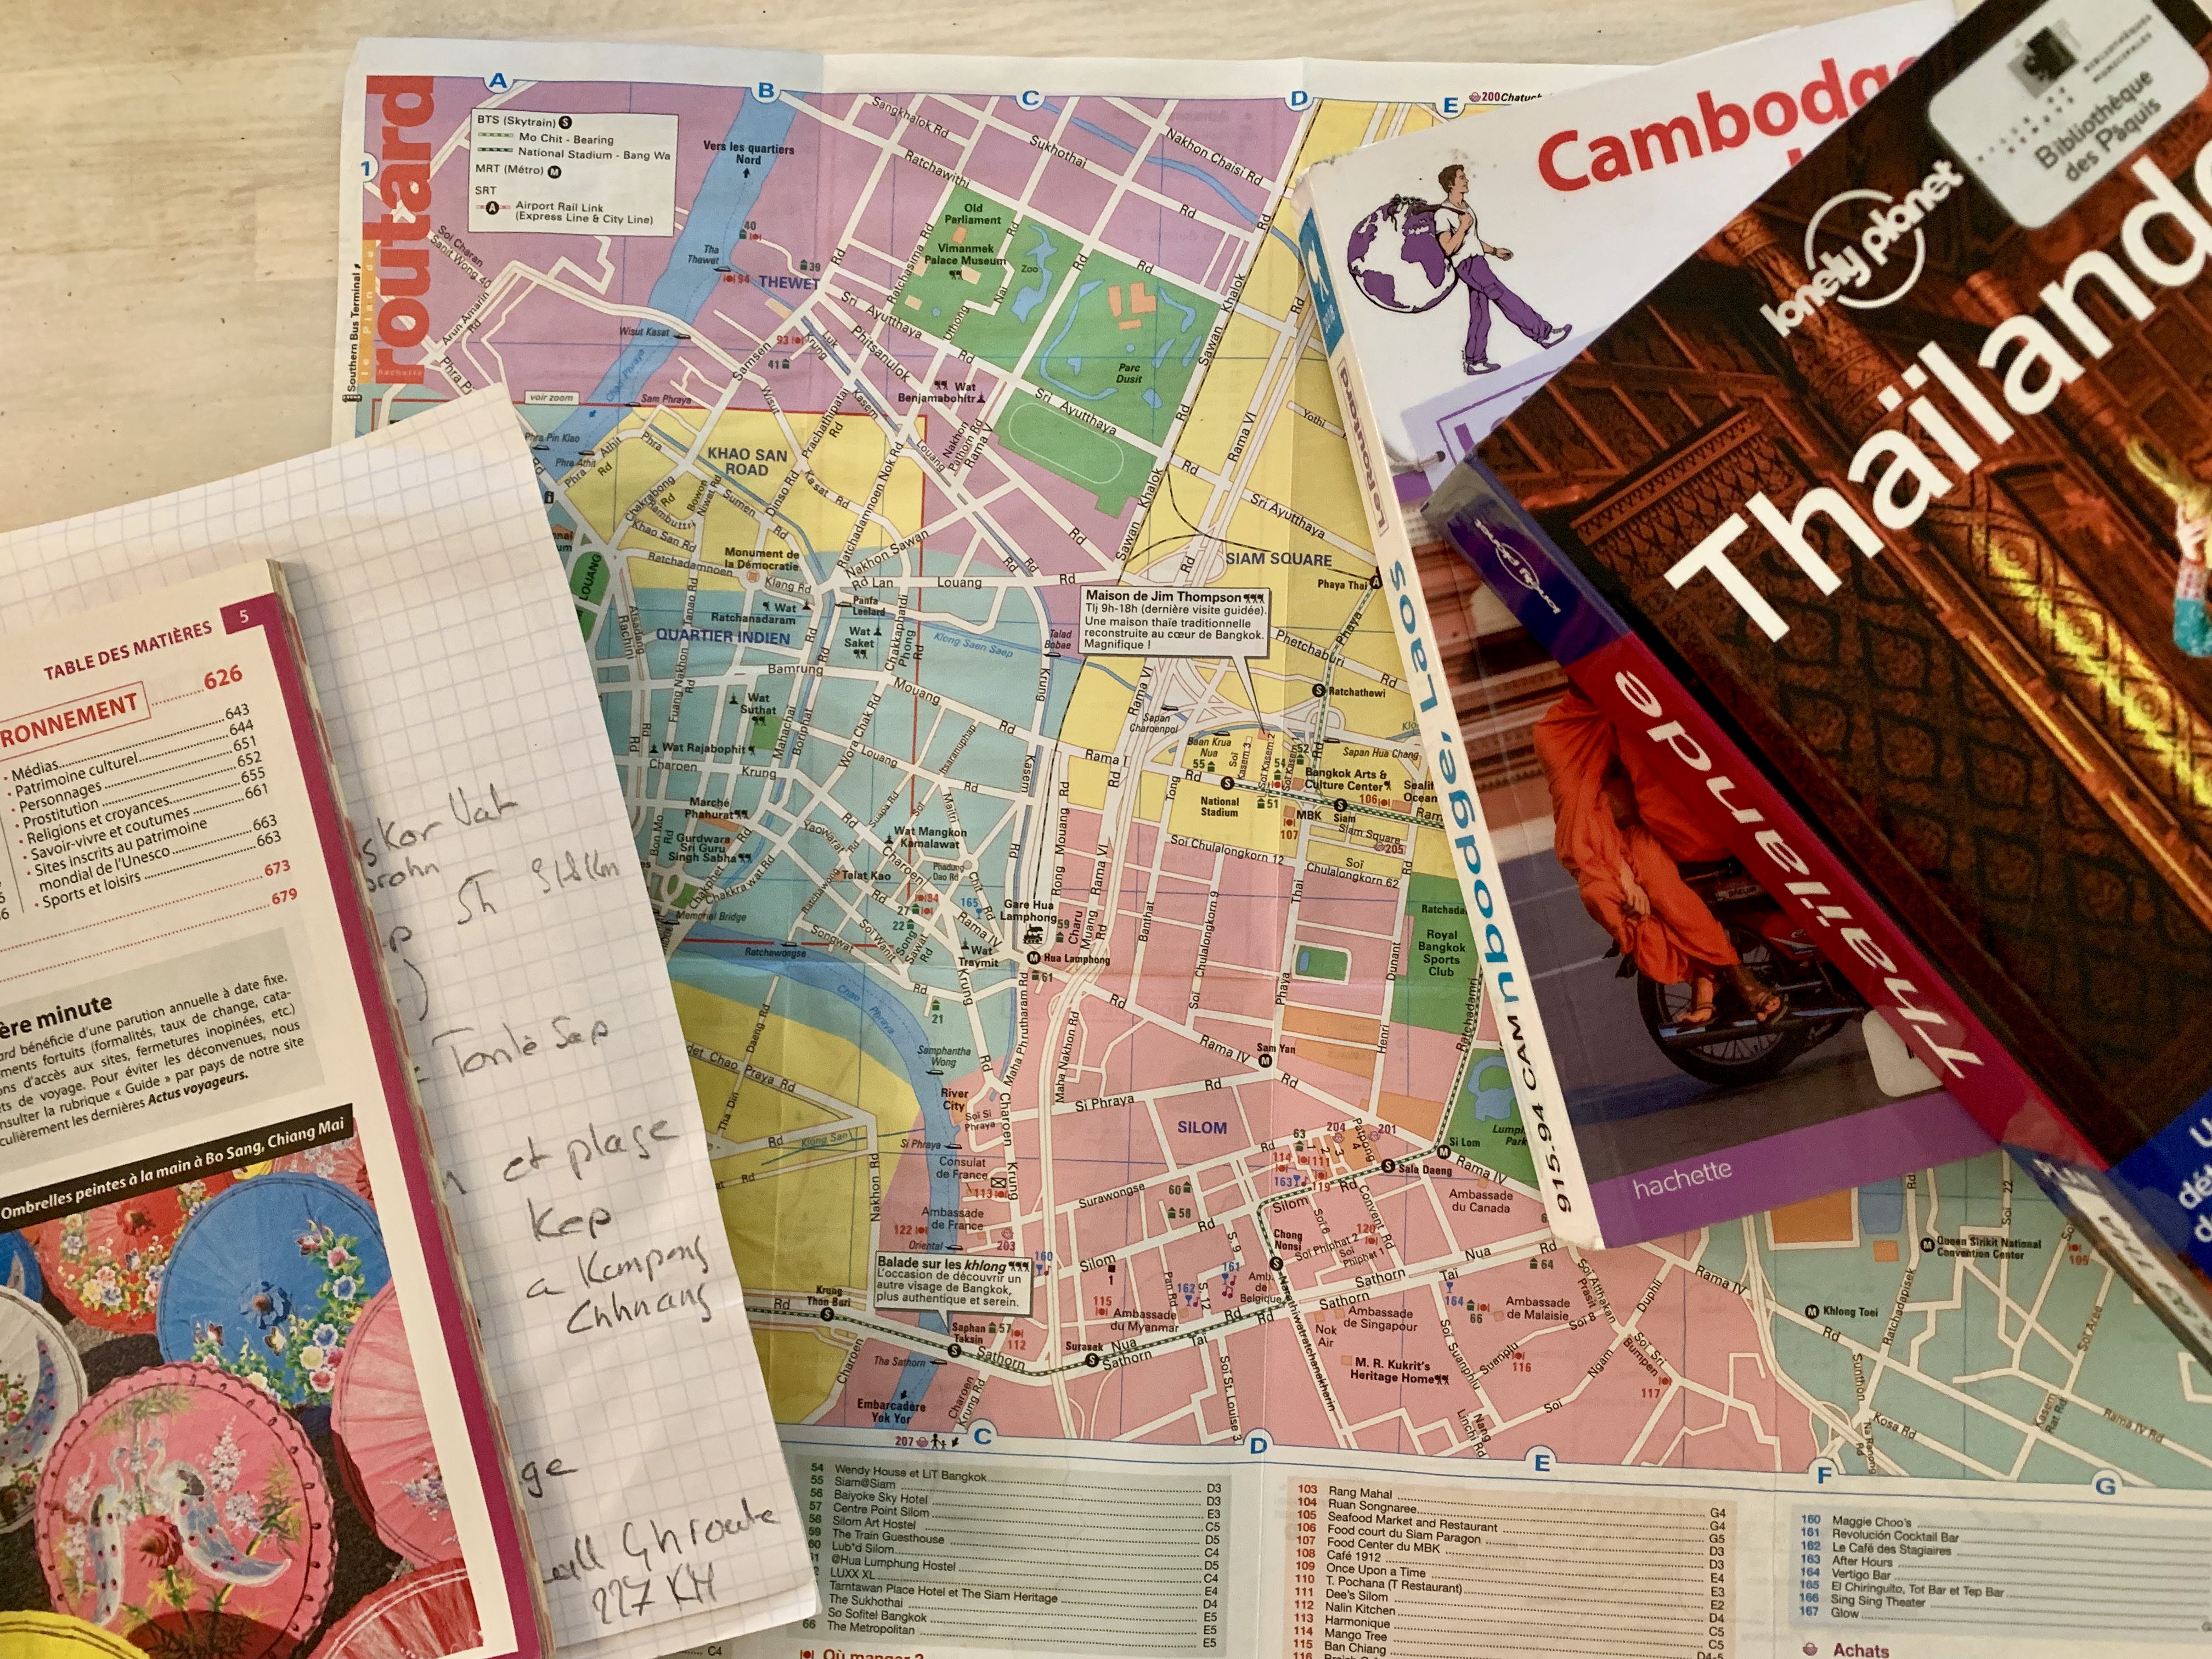 Maps and travel guide books